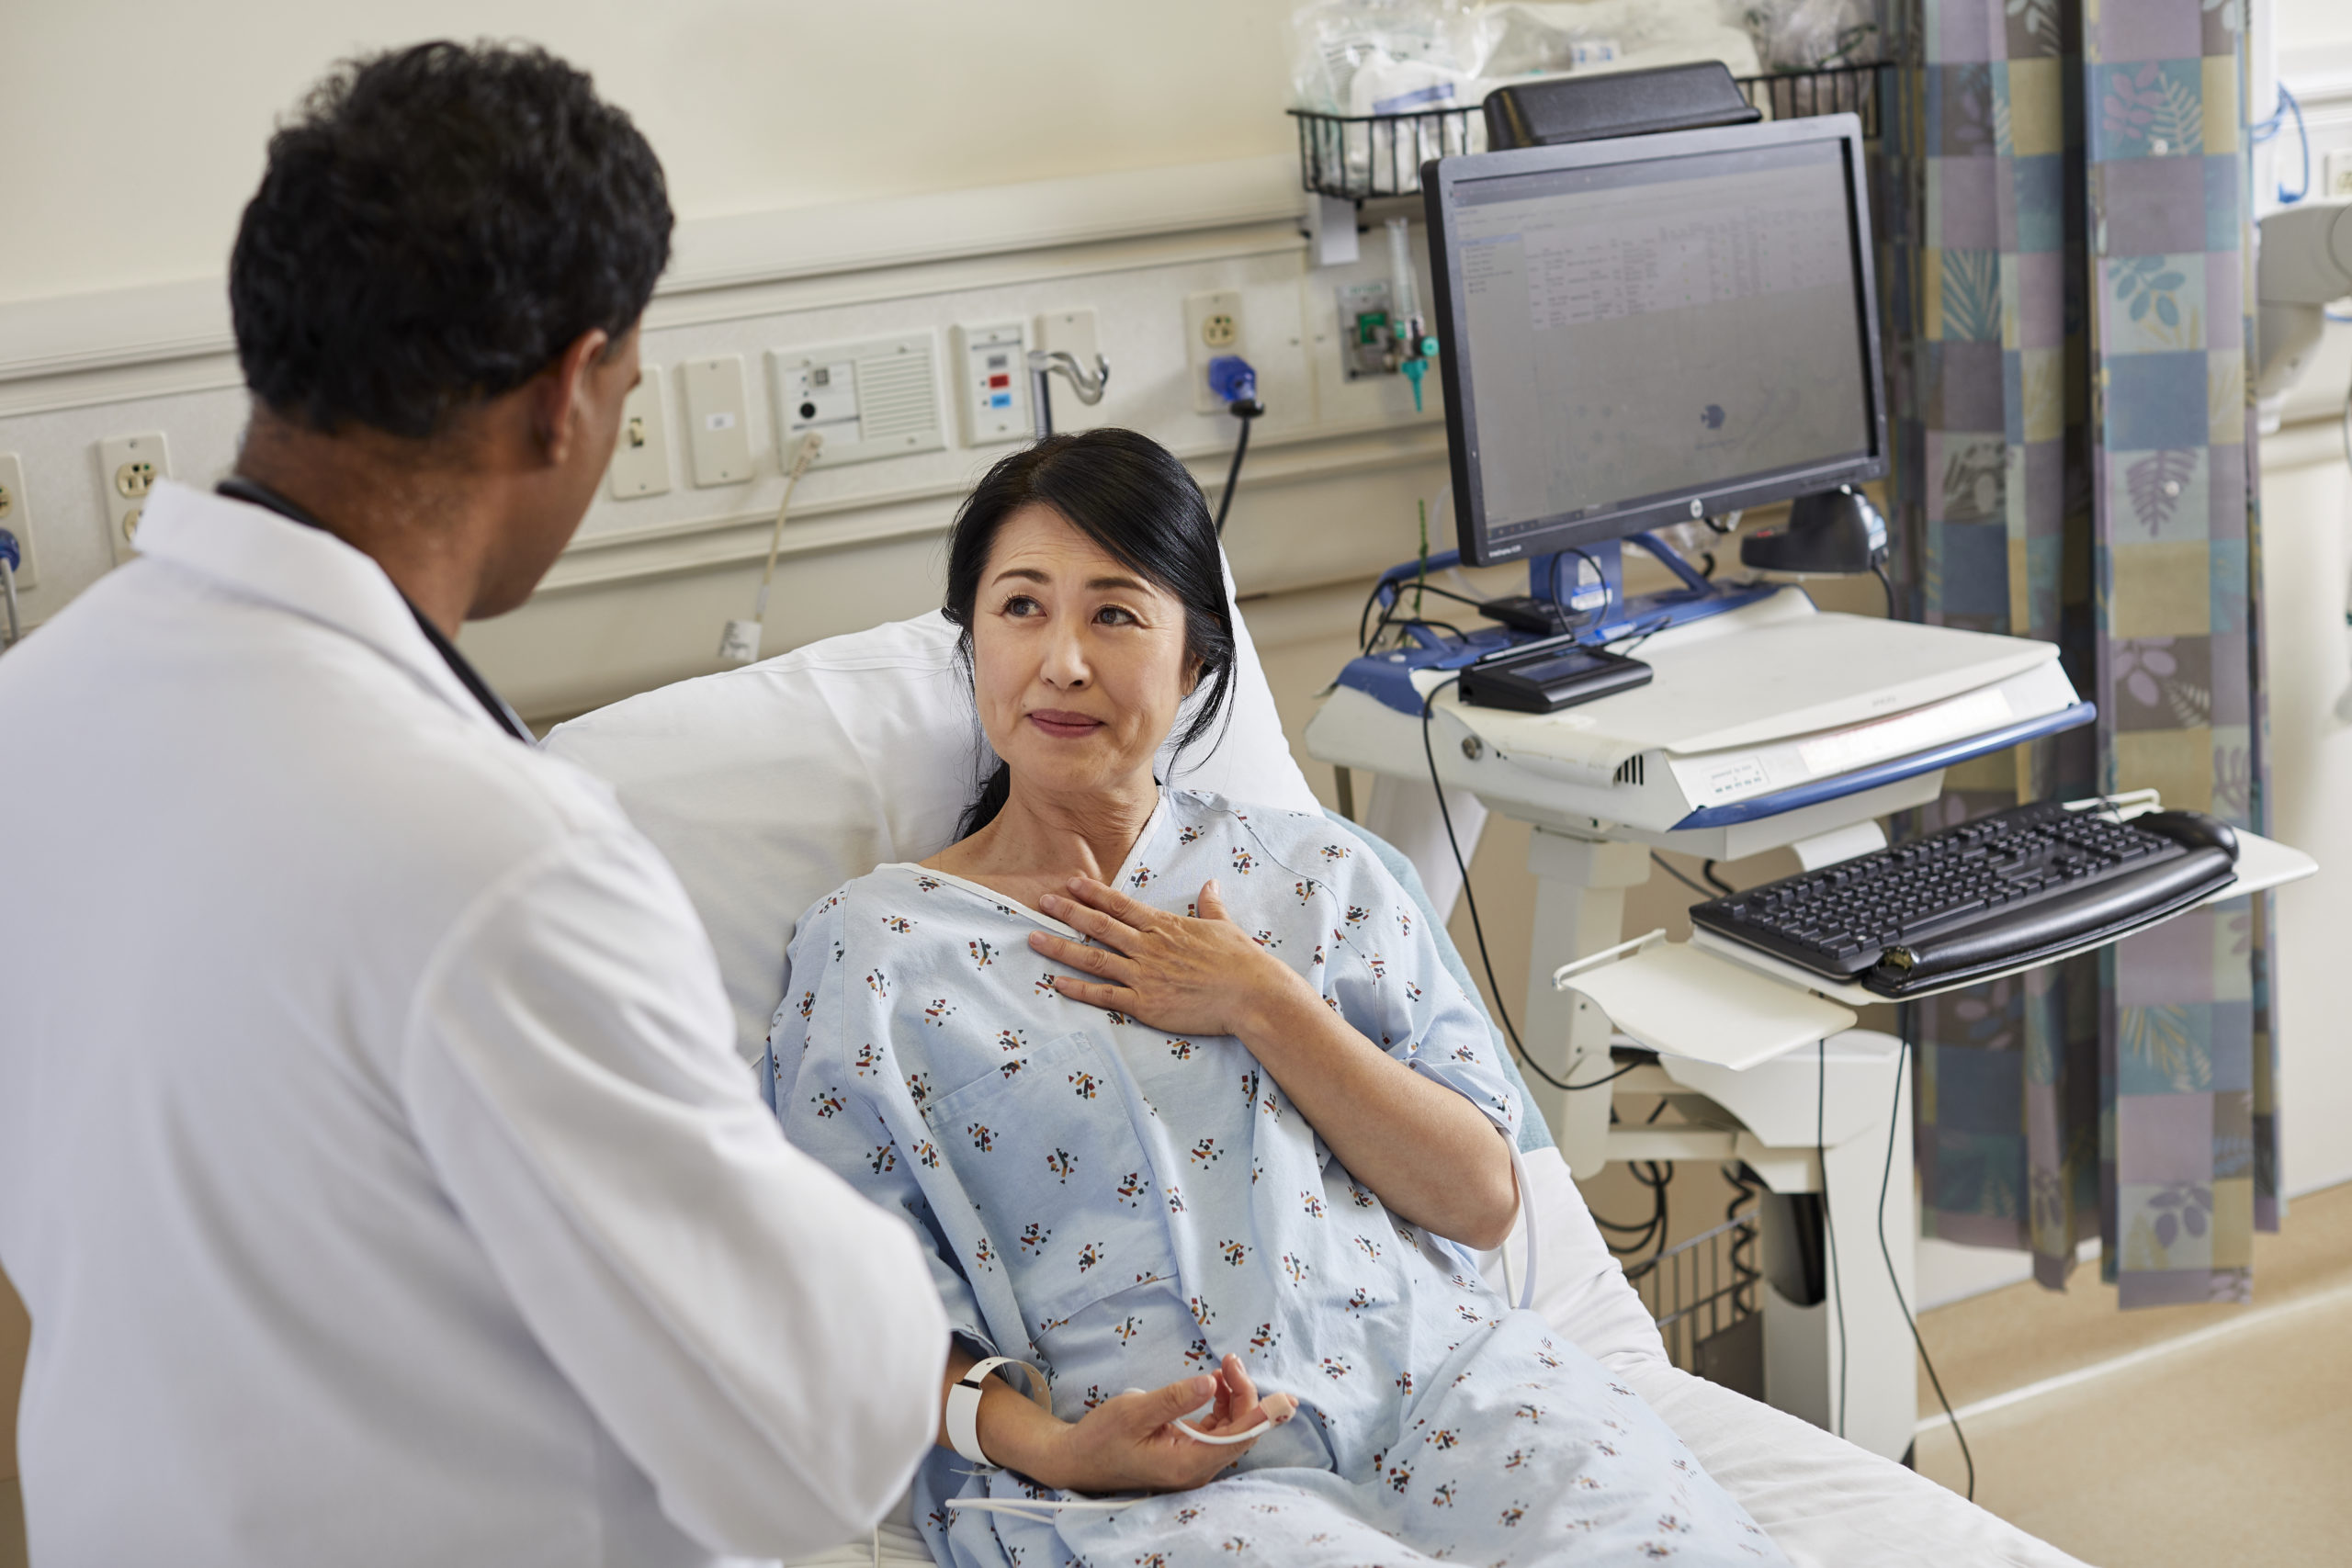 New tool helps emergency medicine physicians provide more personalized care to patients with chest pain